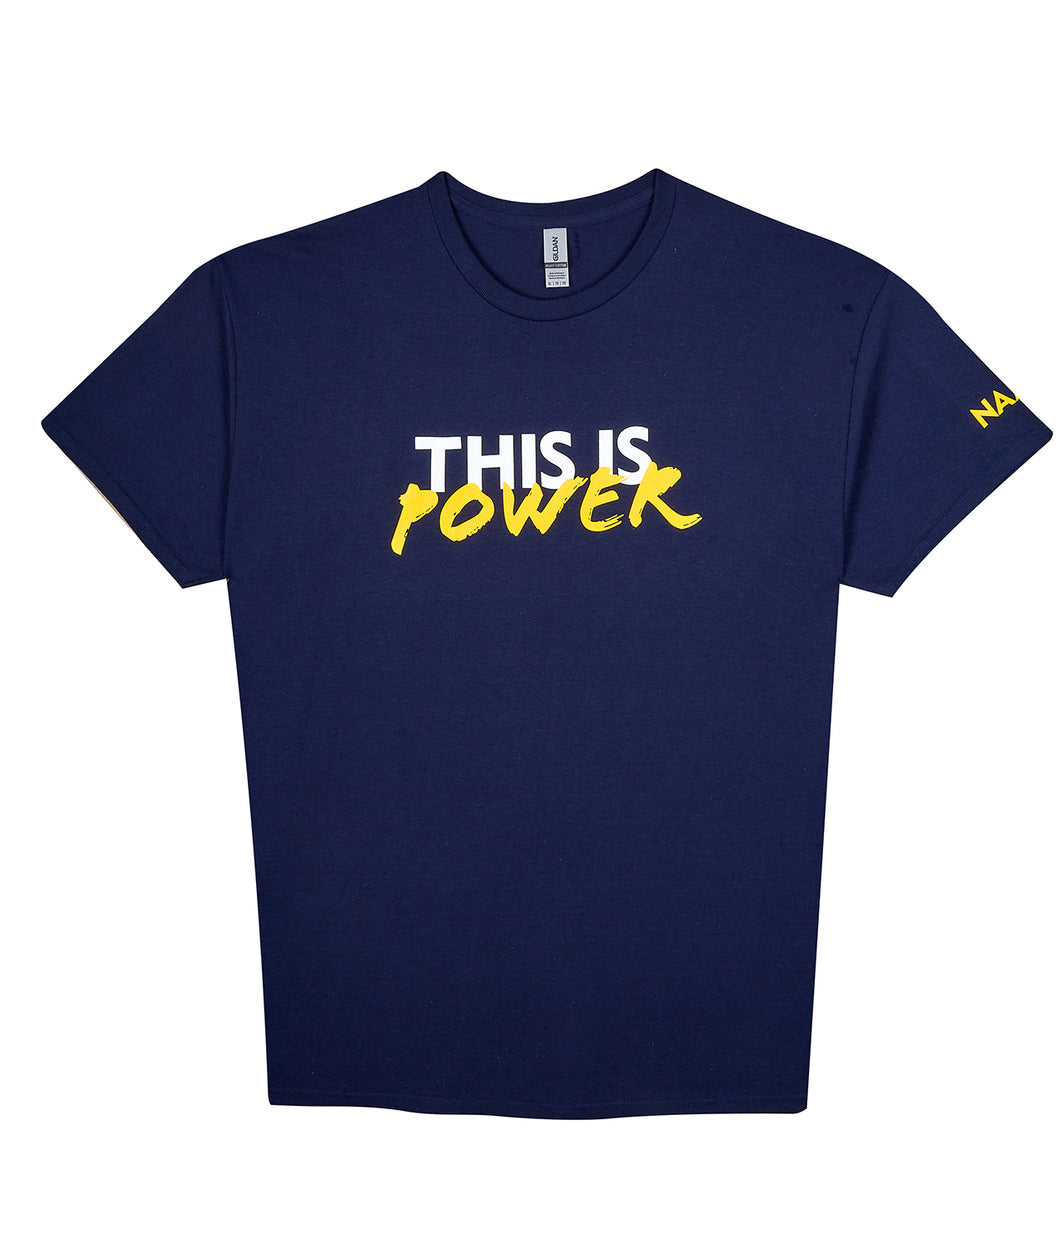 This Is Power T Shirt Navy